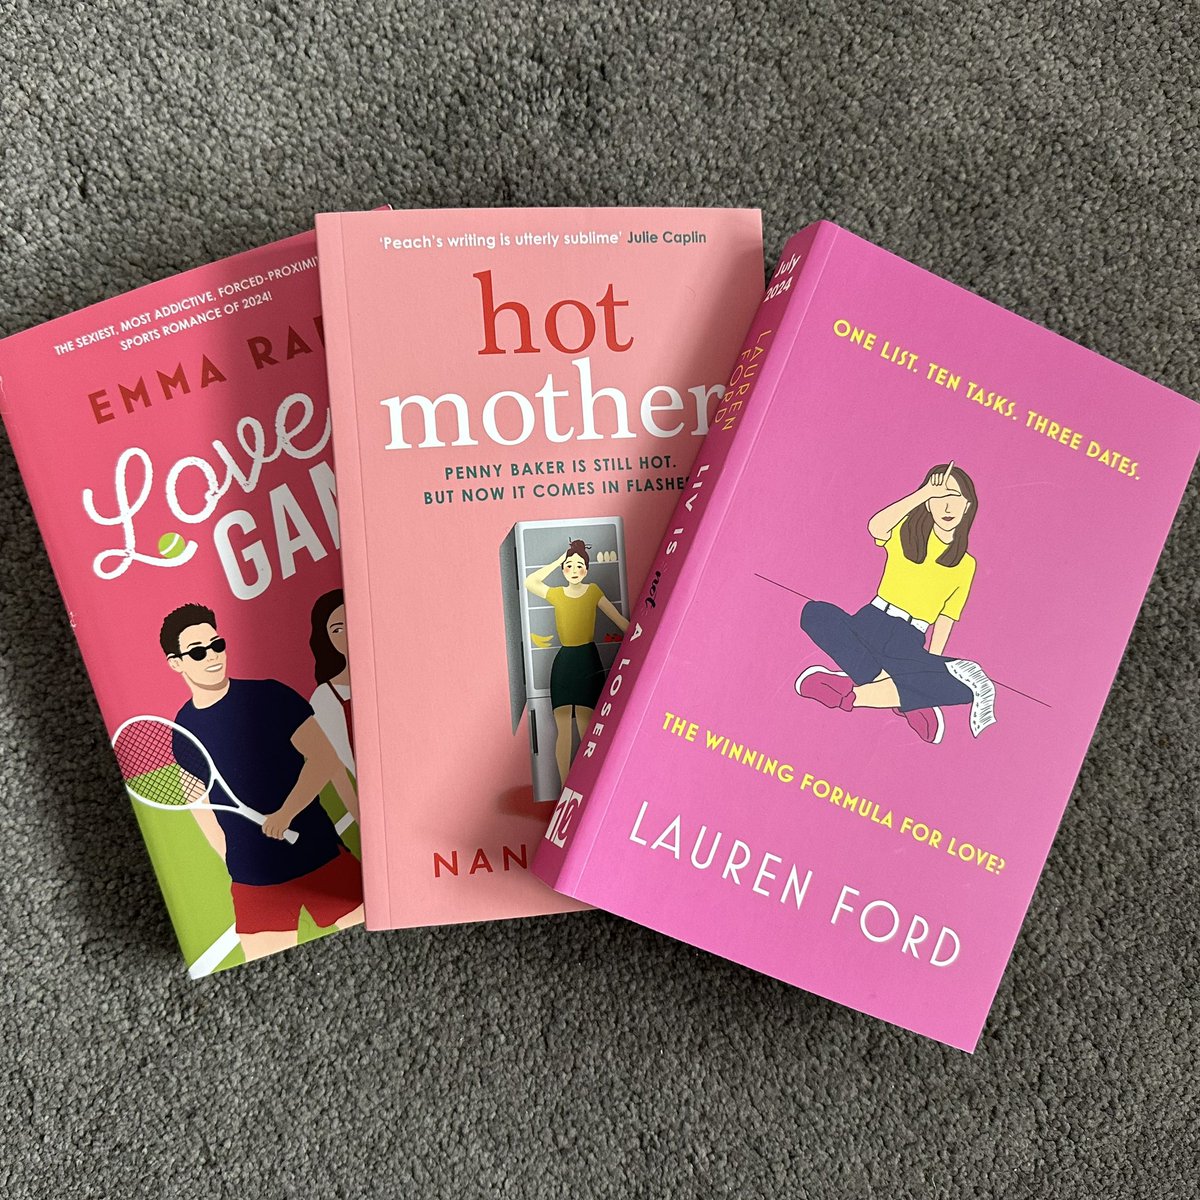 📚📮#BookPost📚📮 A huge thank you to @ThanhmaiUK @canelo_co @HeraBooks for this wonderful pink package of proofs! 💞 📚 #LivIsNotALoser by @LaurenMFord 📚 #HotMother by @Mumhasdementia 📚 #LoveGame by @ECScullion #BookTwitter #Bookblogger